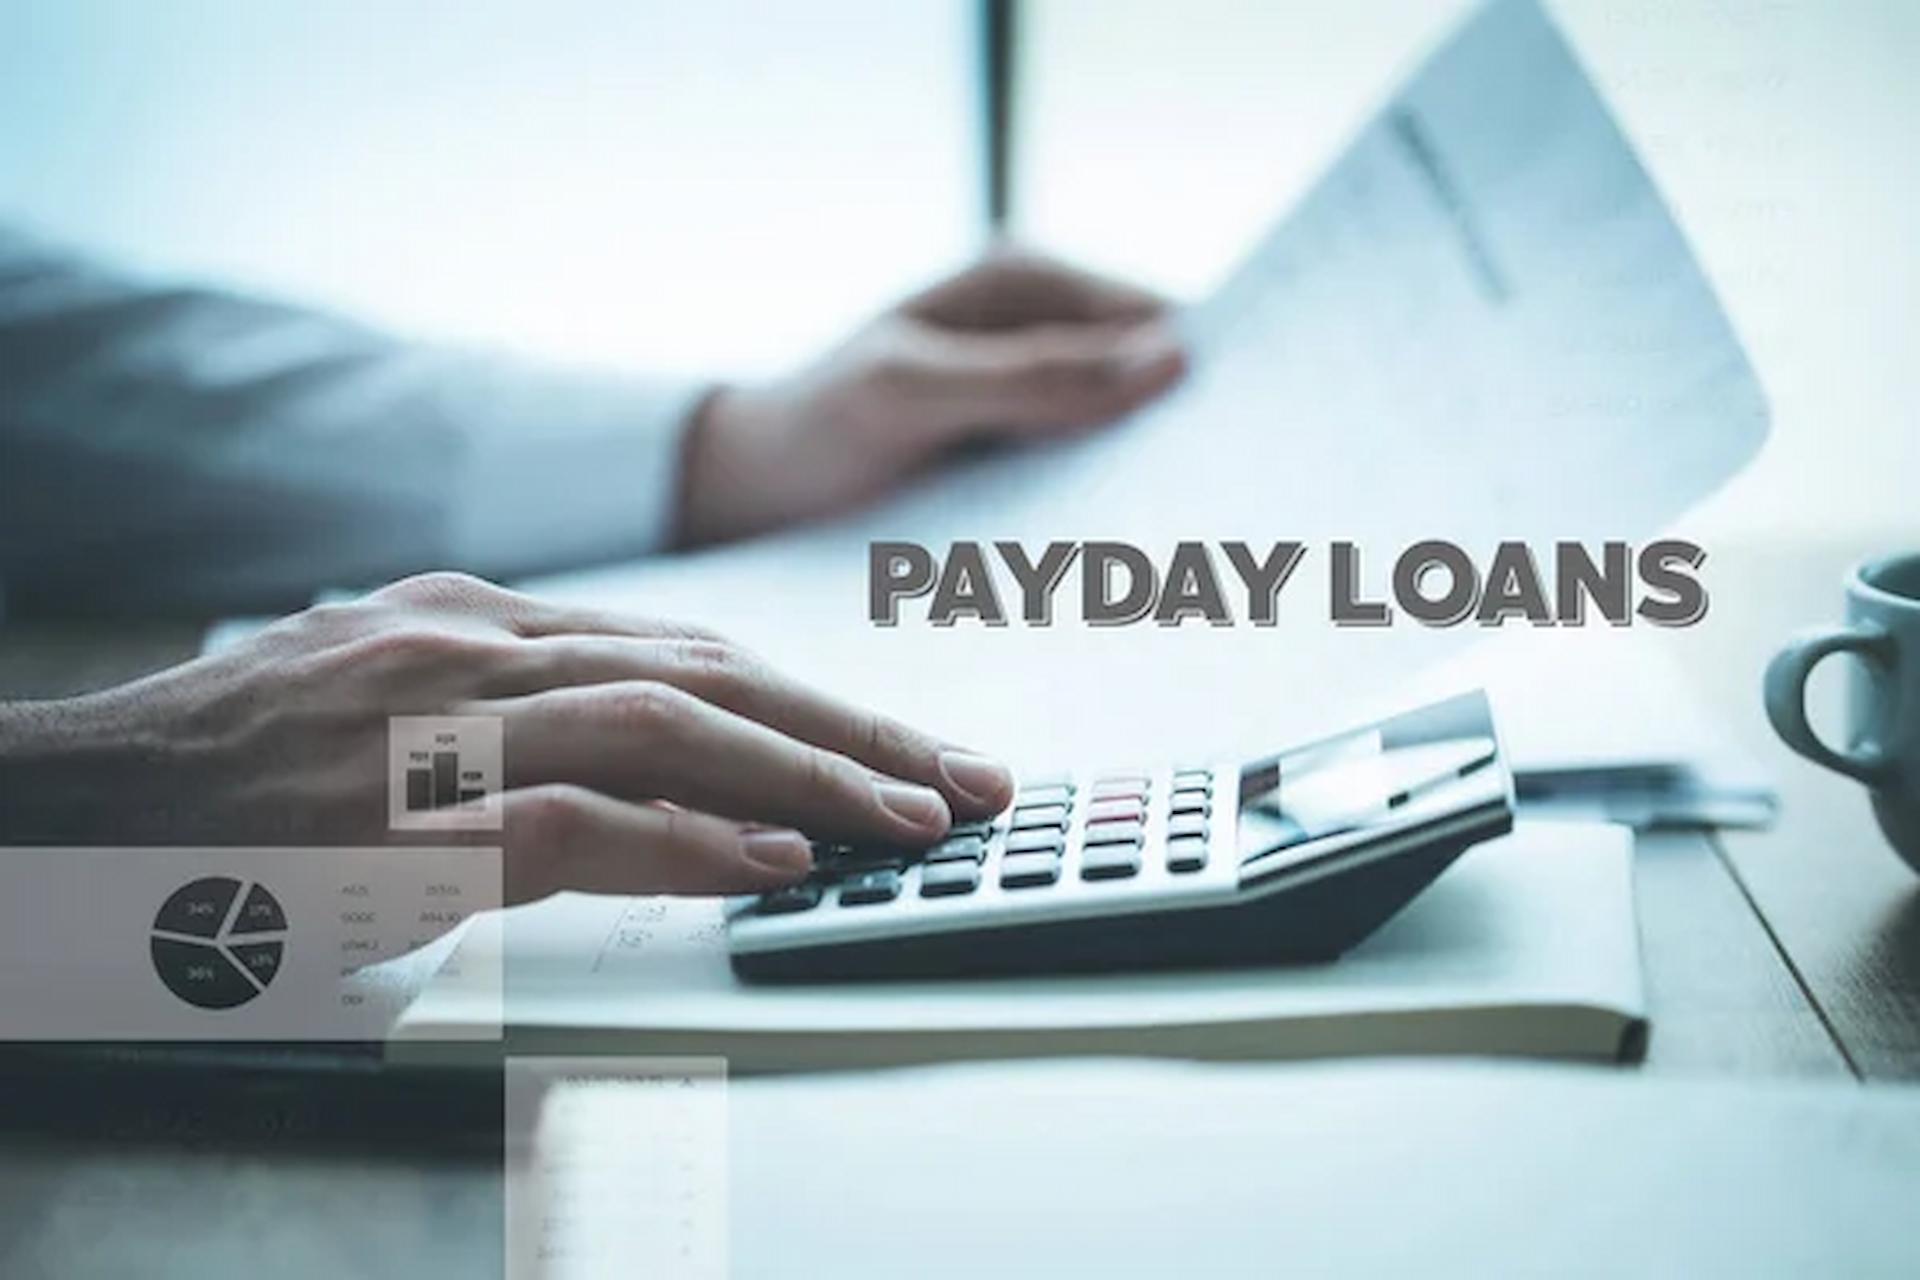 How to Use Payday Loans Responsibly and Avoid Debt Traps